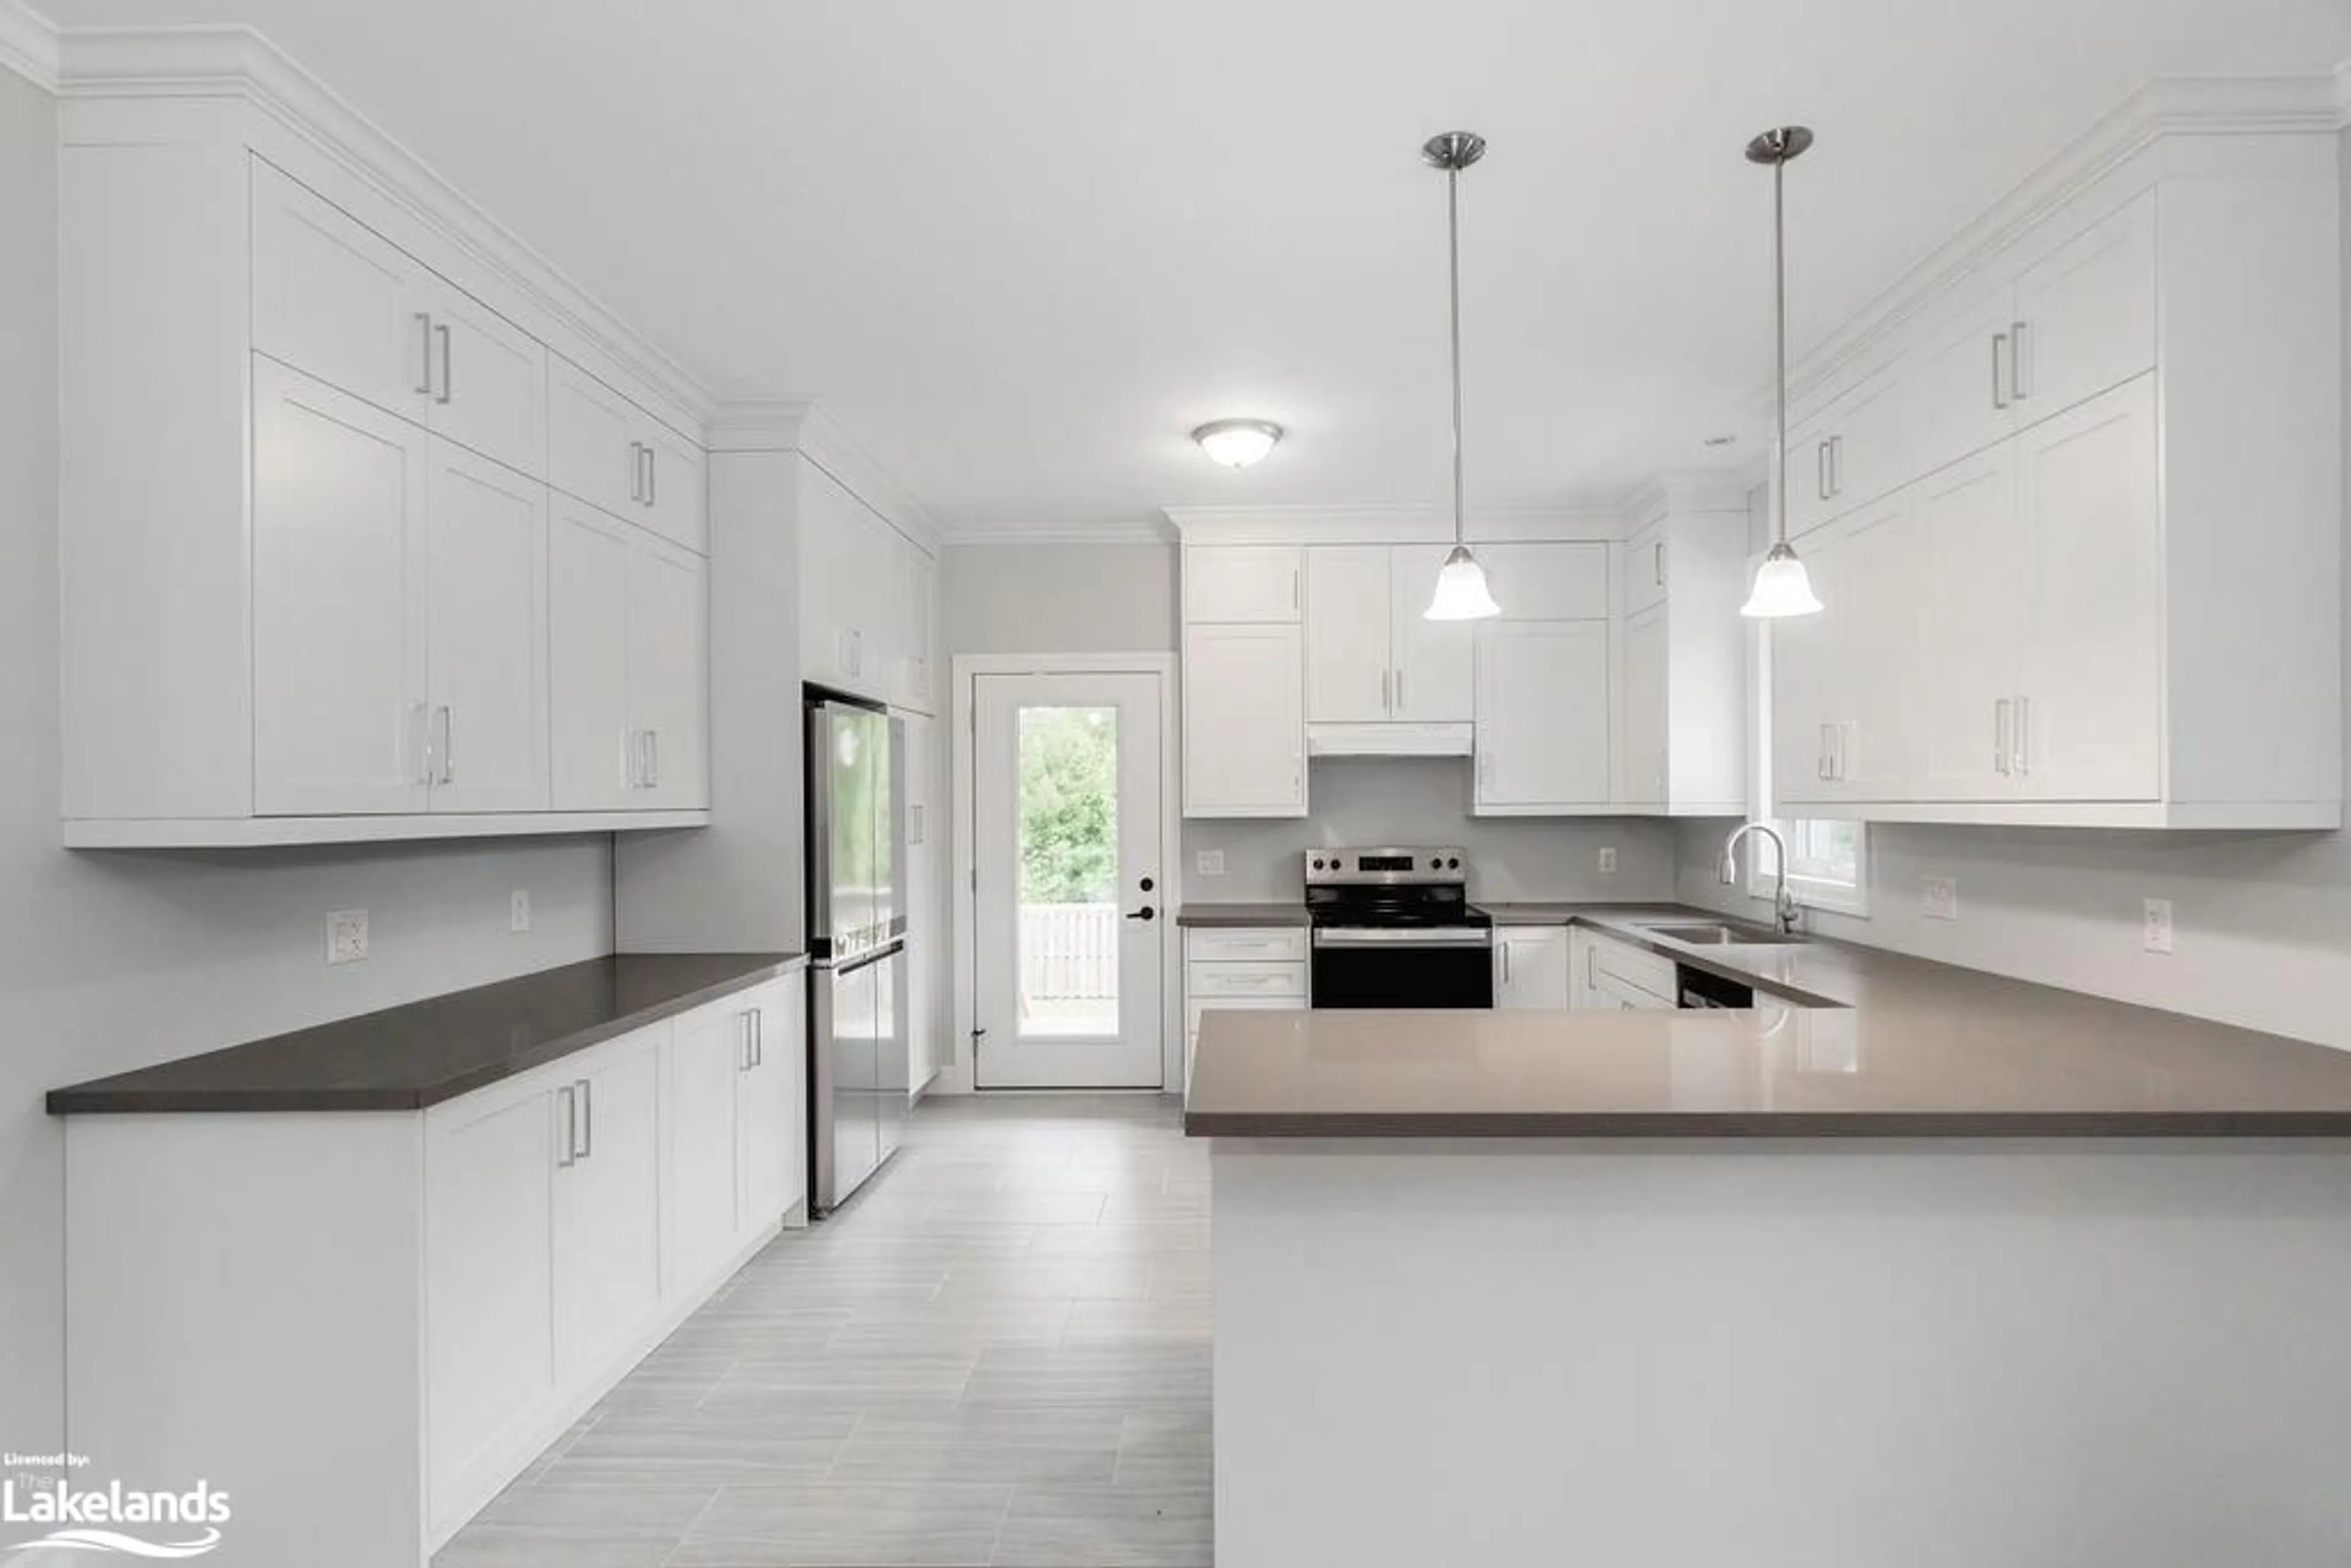 Contemporary kitchen for 51 Natures Trail, Wasaga Beach Ontario L9Z 0H4